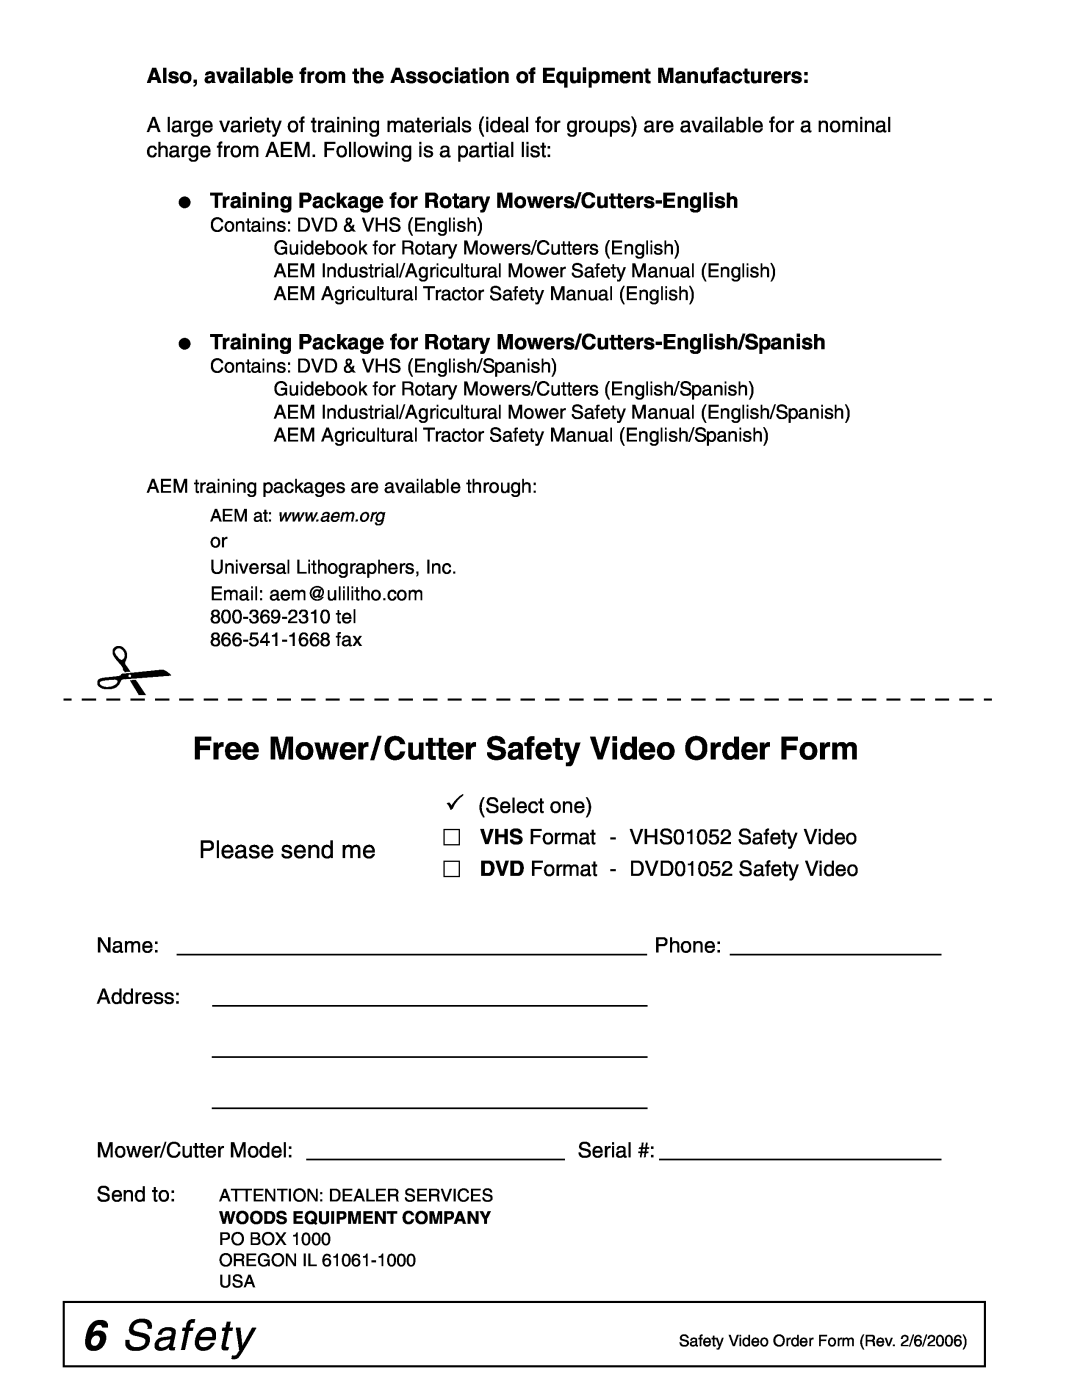 Woods Equipment BW180XQ, BW126XQ manual Free Mower/Cutter Safety Video Order Form, Please send me 